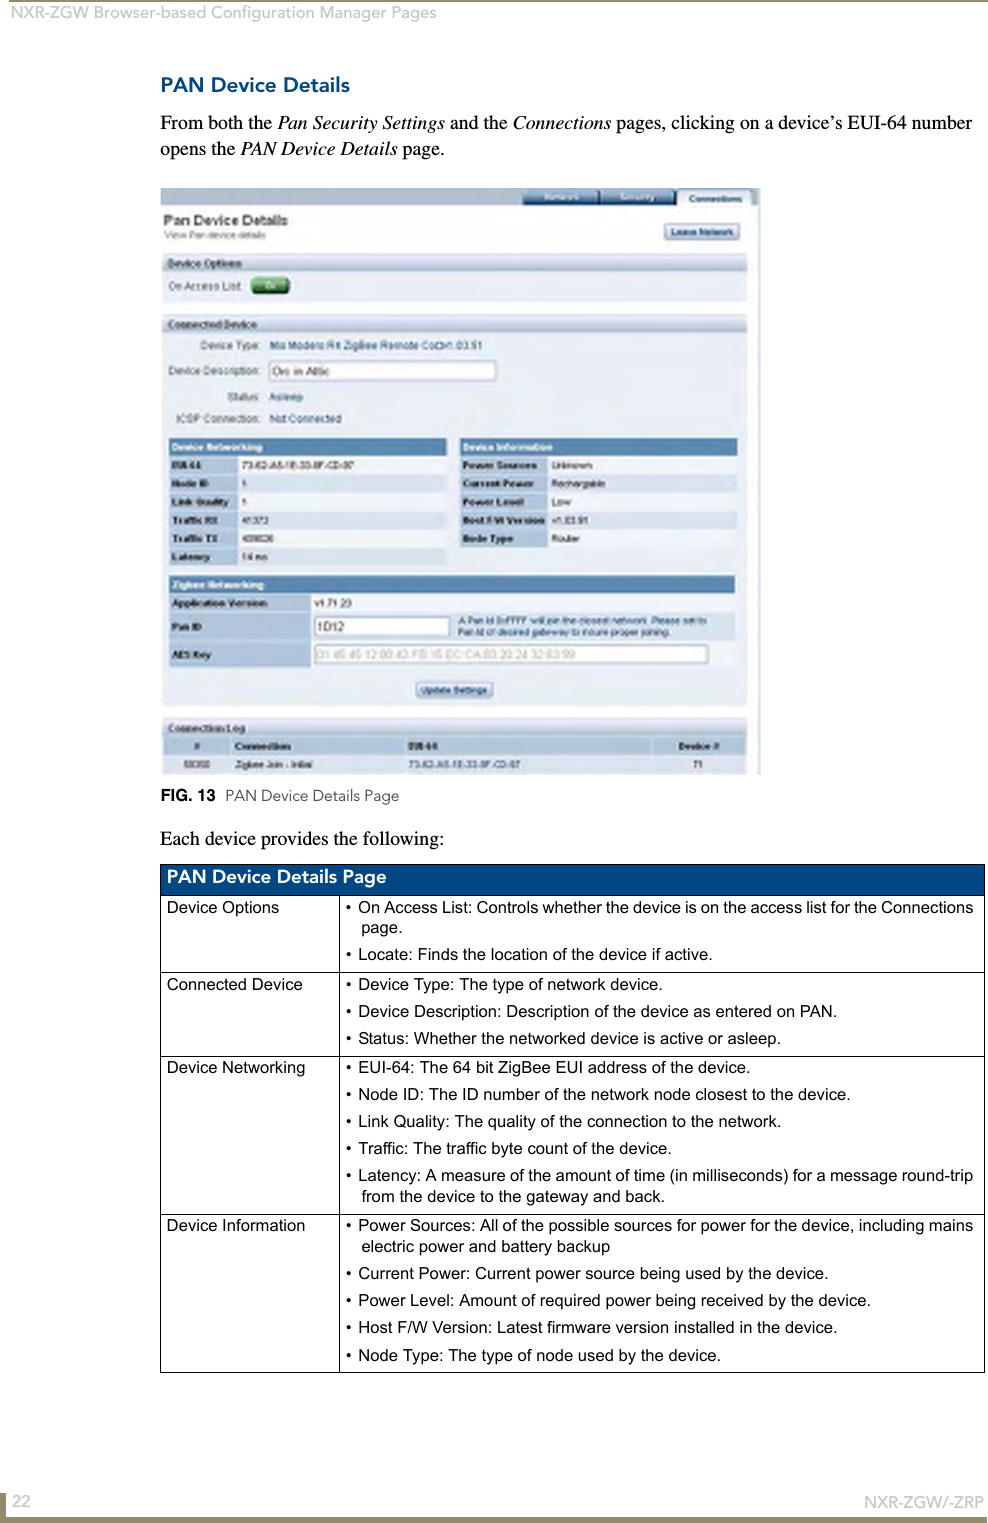 NXR-ZGW Browser-based Configuration Manager Pages22 NXR-ZGW/-ZRPPAN Device DetailsFrom both the Pan Security Settings and the Connections pages, clicking on a device’s EUI-64 number opens the PAN Device Details page. Each device provides the following:FIG. 13  PAN Device Details PagePAN Device Details PageDevice Options • On Access List: Controls whether the device is on the access list for the Connections page.• Locate: Finds the location of the device if active.Connected Device • Device Type: The type of network device.• Device Description: Description of the device as entered on PAN.• Status: Whether the networked device is active or asleep.Device Networking • EUI-64: The 64 bit ZigBee EUI address of the device.• Node ID: The ID number of the network node closest to the device.• Link Quality: The quality of the connection to the network.• Traffic: The traffic byte count of the device.• Latency: A measure of the amount of time (in milliseconds) for a message round-trip from the device to the gateway and back.Device Information • Power Sources: All of the possible sources for power for the device, including mains electric power and battery backup• Current Power: Current power source being used by the device.• Power Level: Amount of required power being received by the device.• Host F/W Version: Latest firmware version installed in the device.• Node Type: The type of node used by the device.